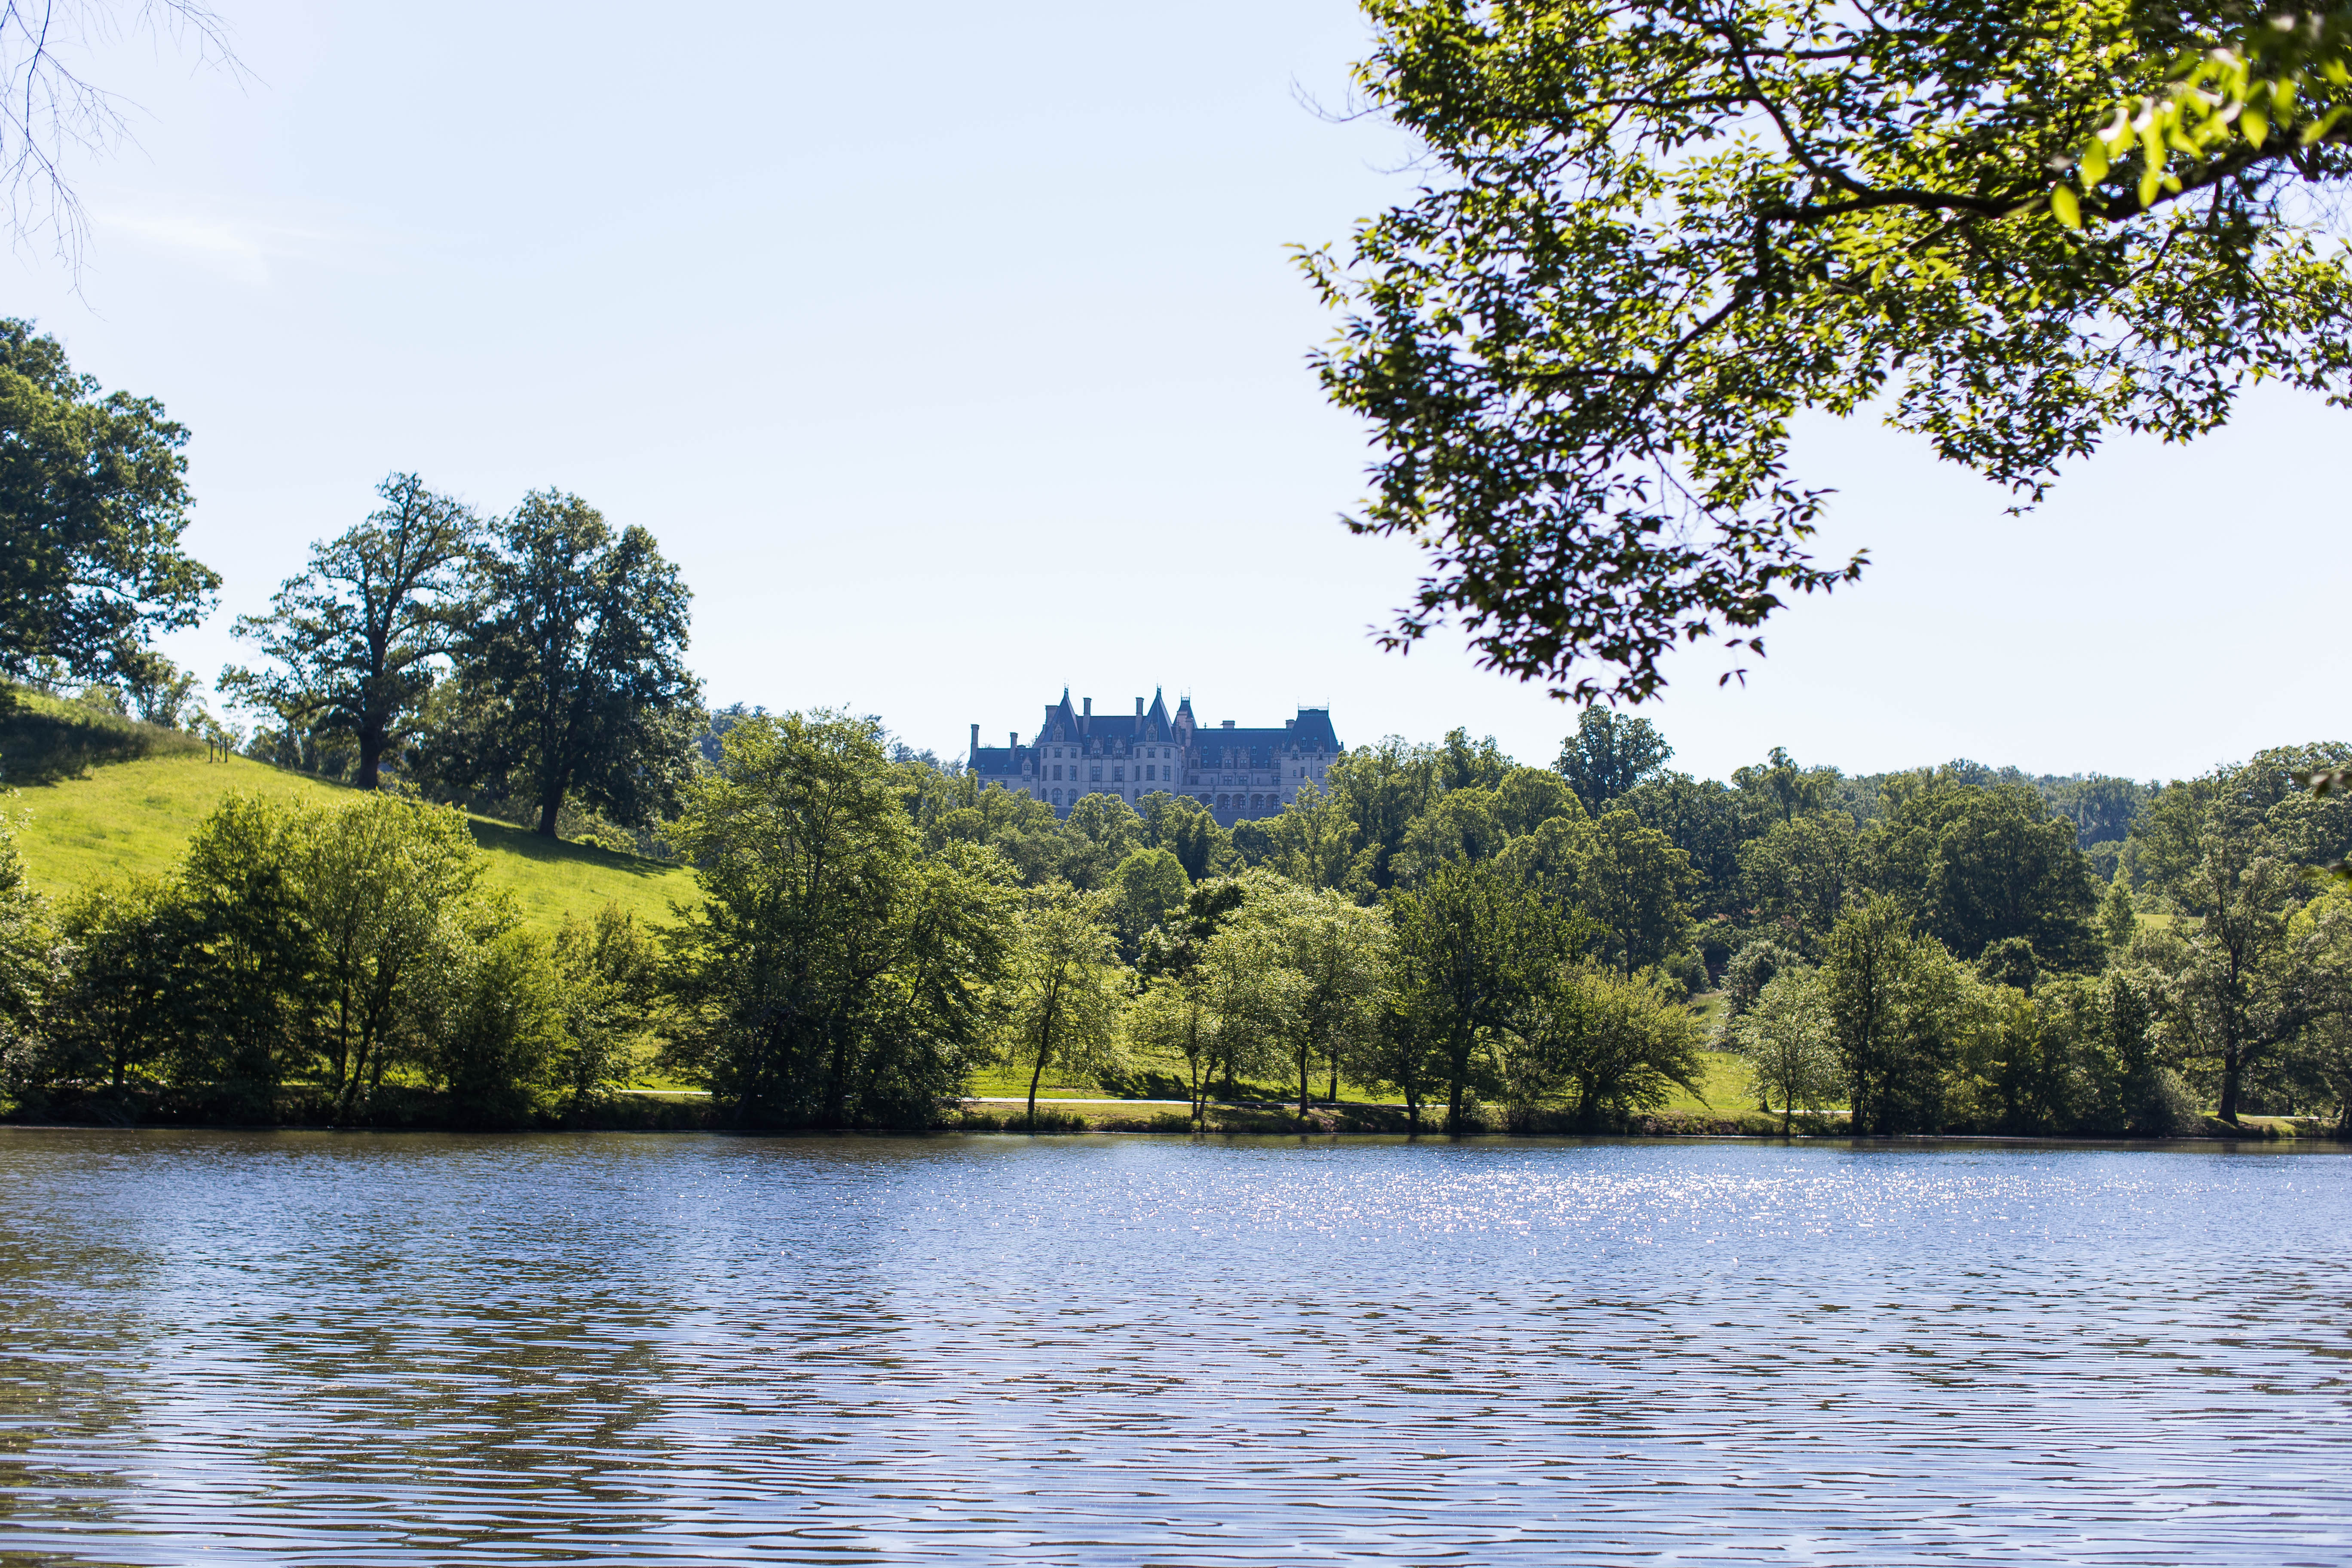 Is a Trip to the Biltmore Worth It?